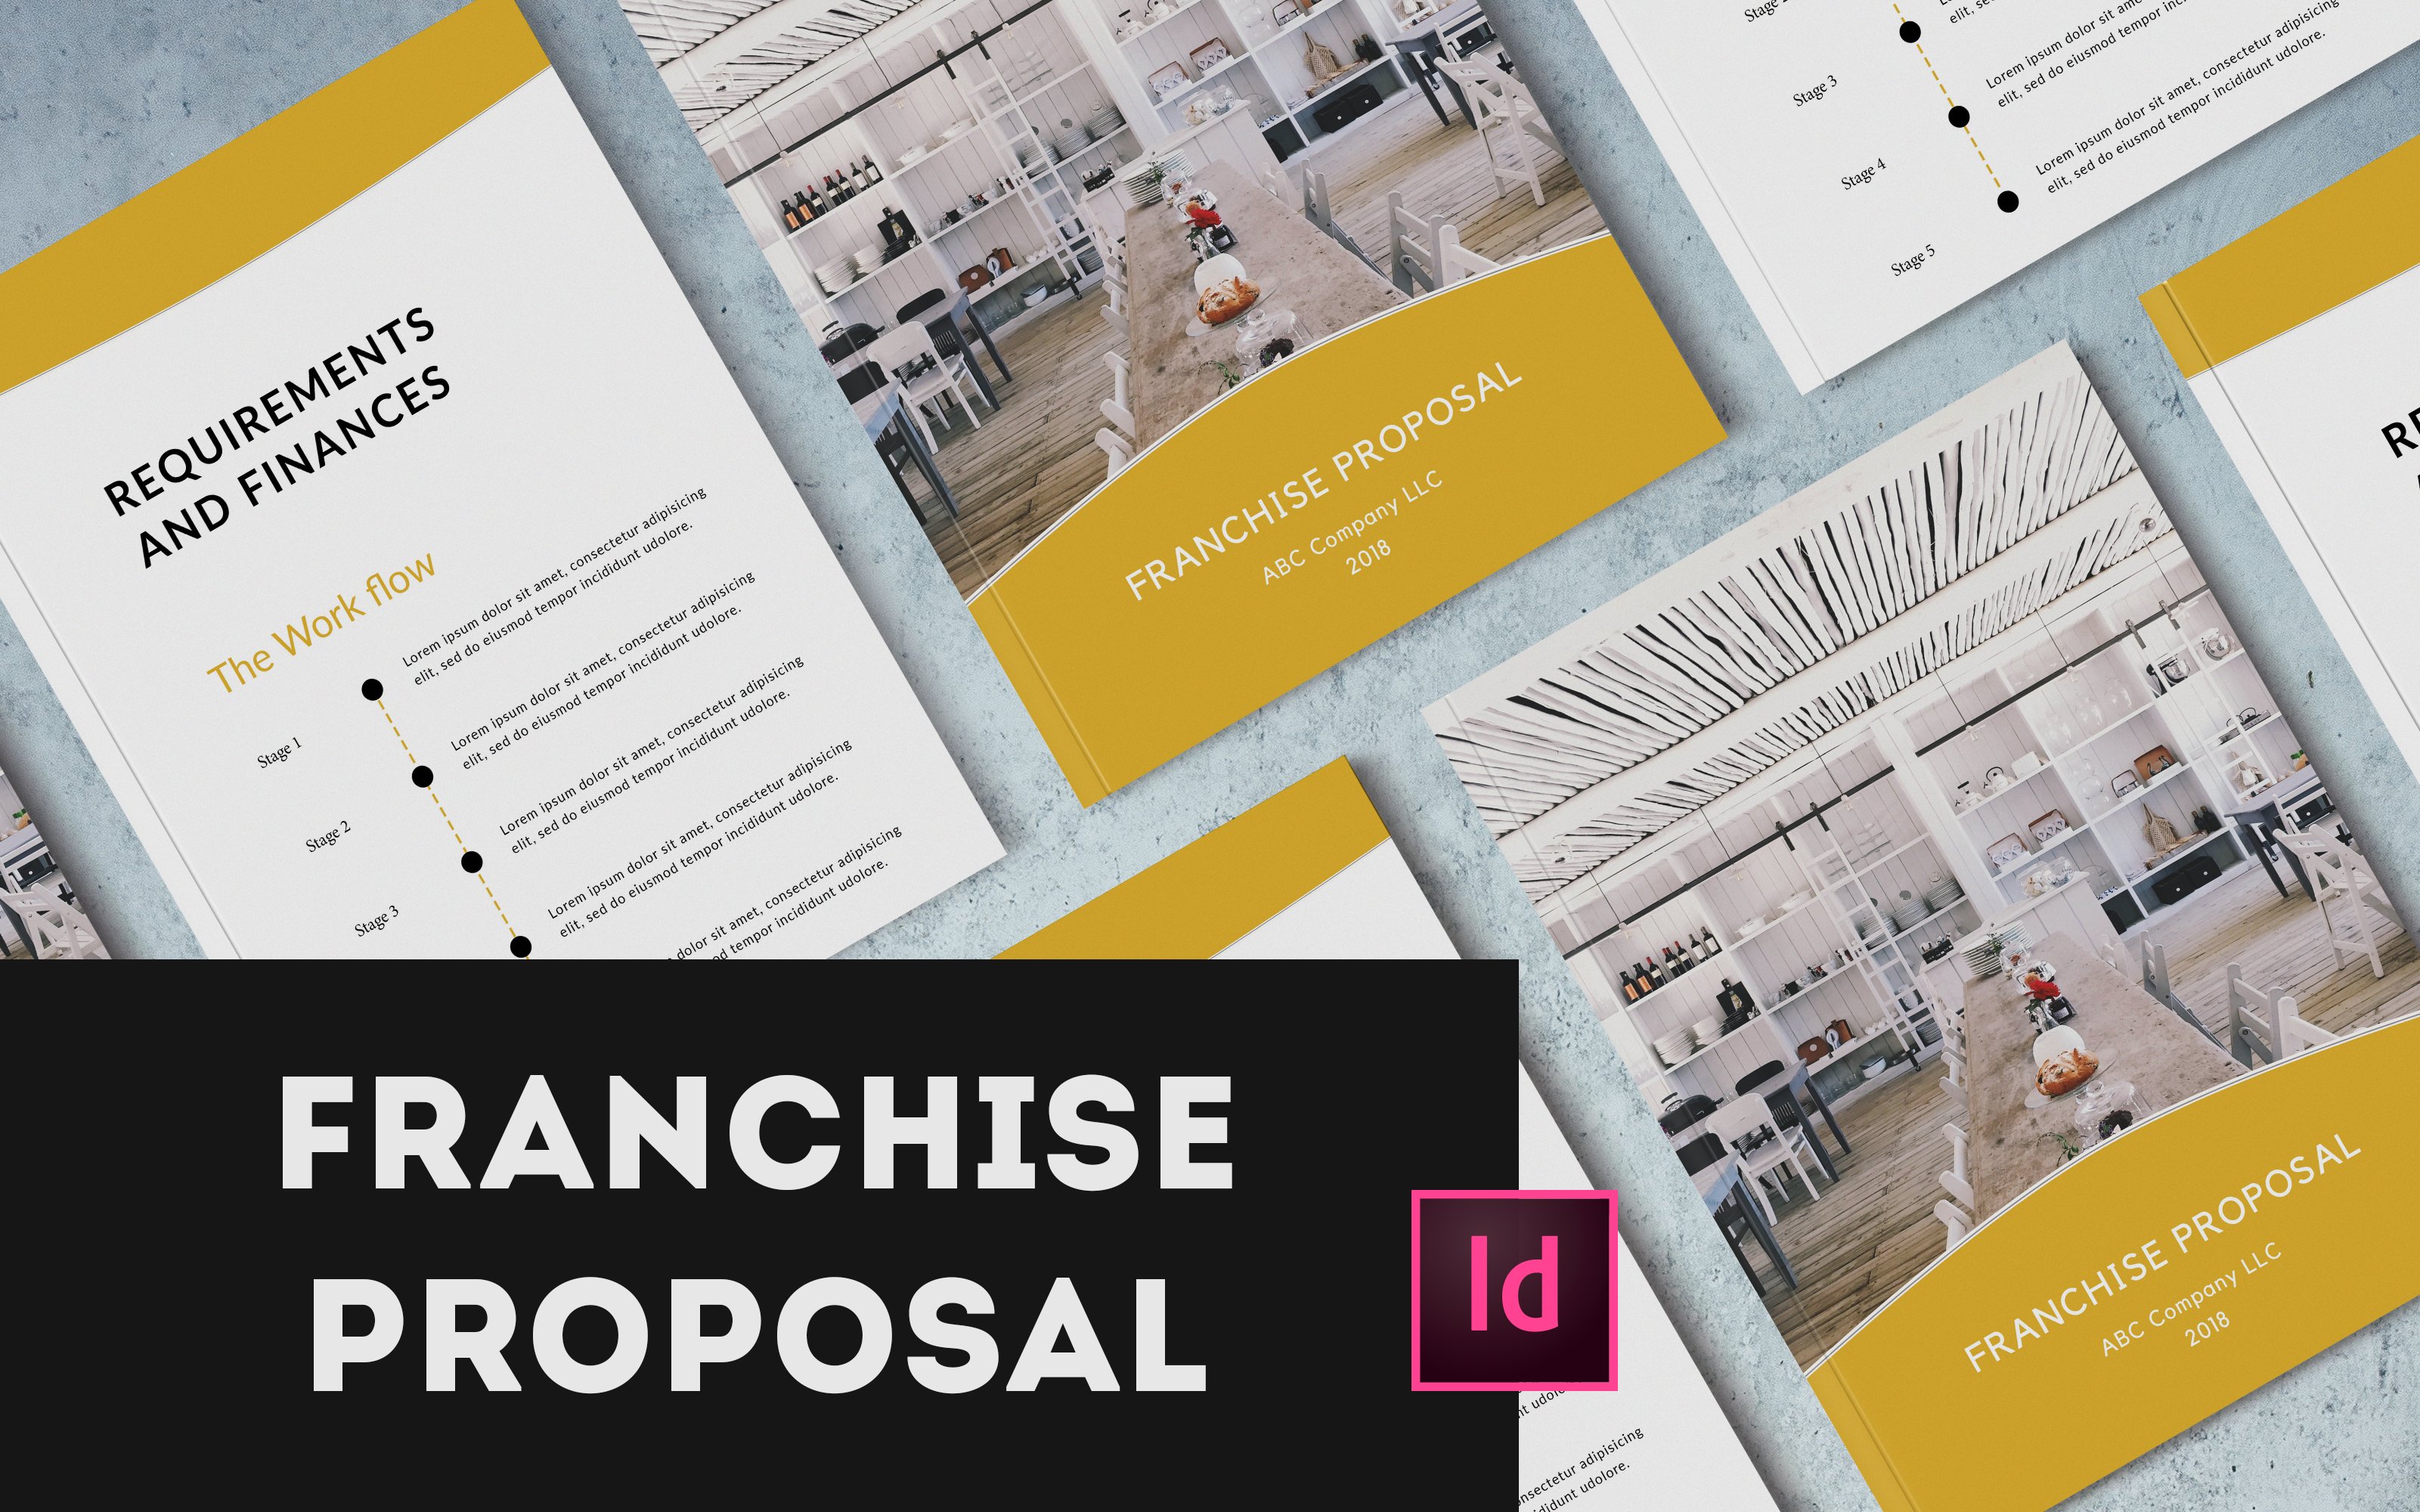 Franchise Business Proposal cover image.